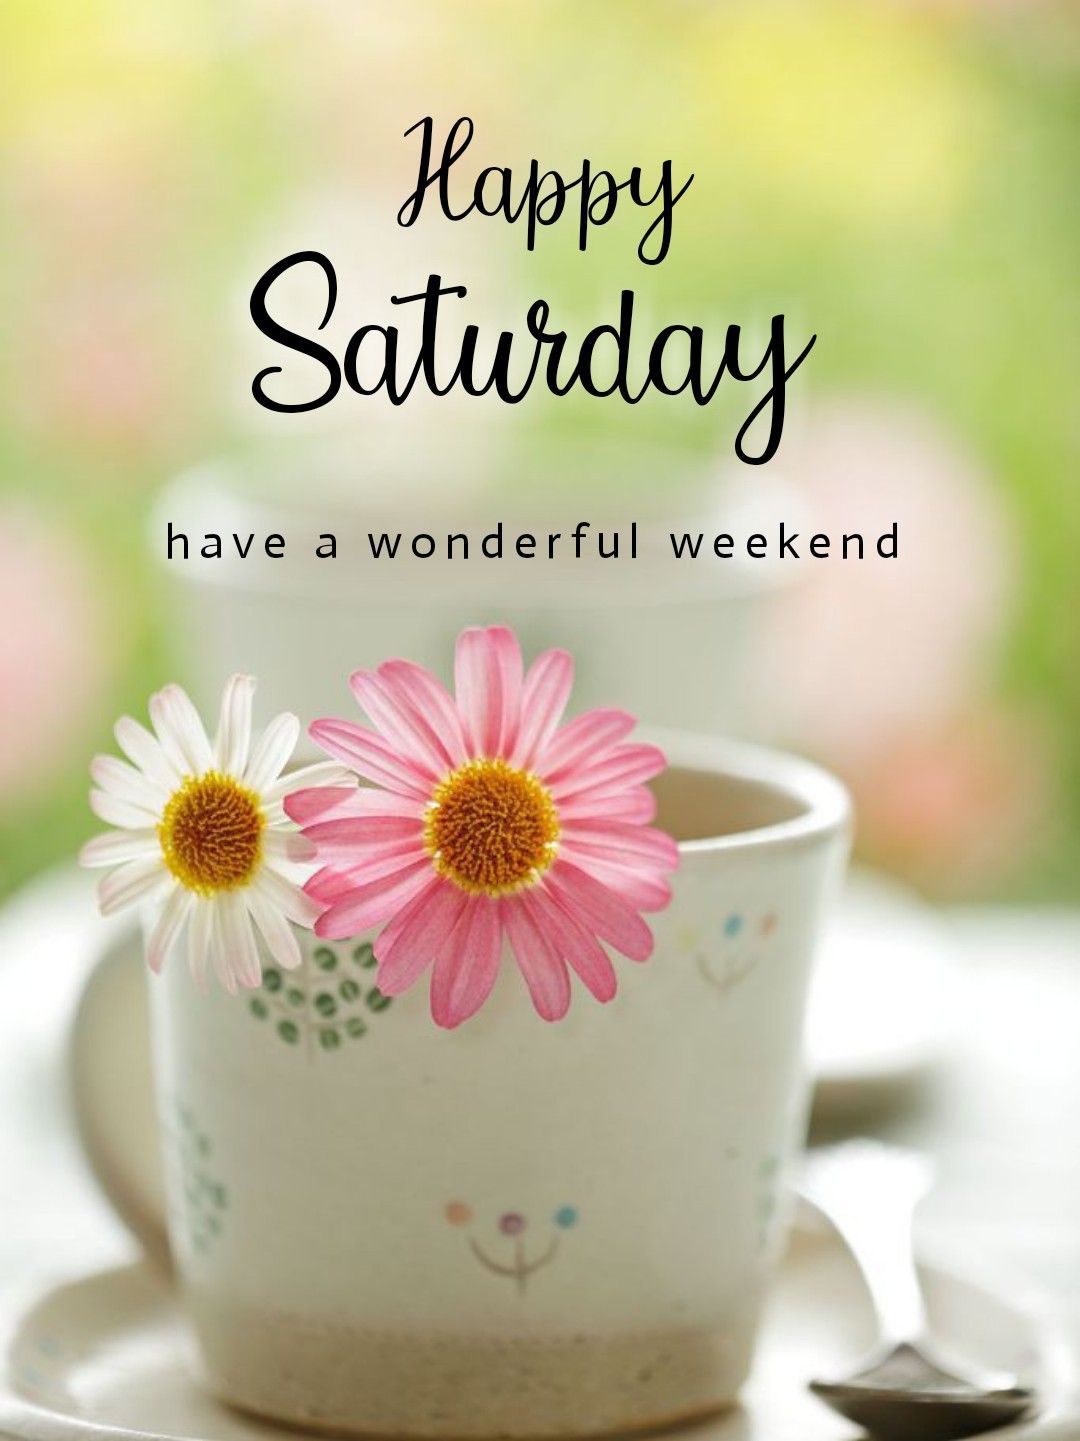 Happy Saturday Image for Whatsapp with Quotes and Messages